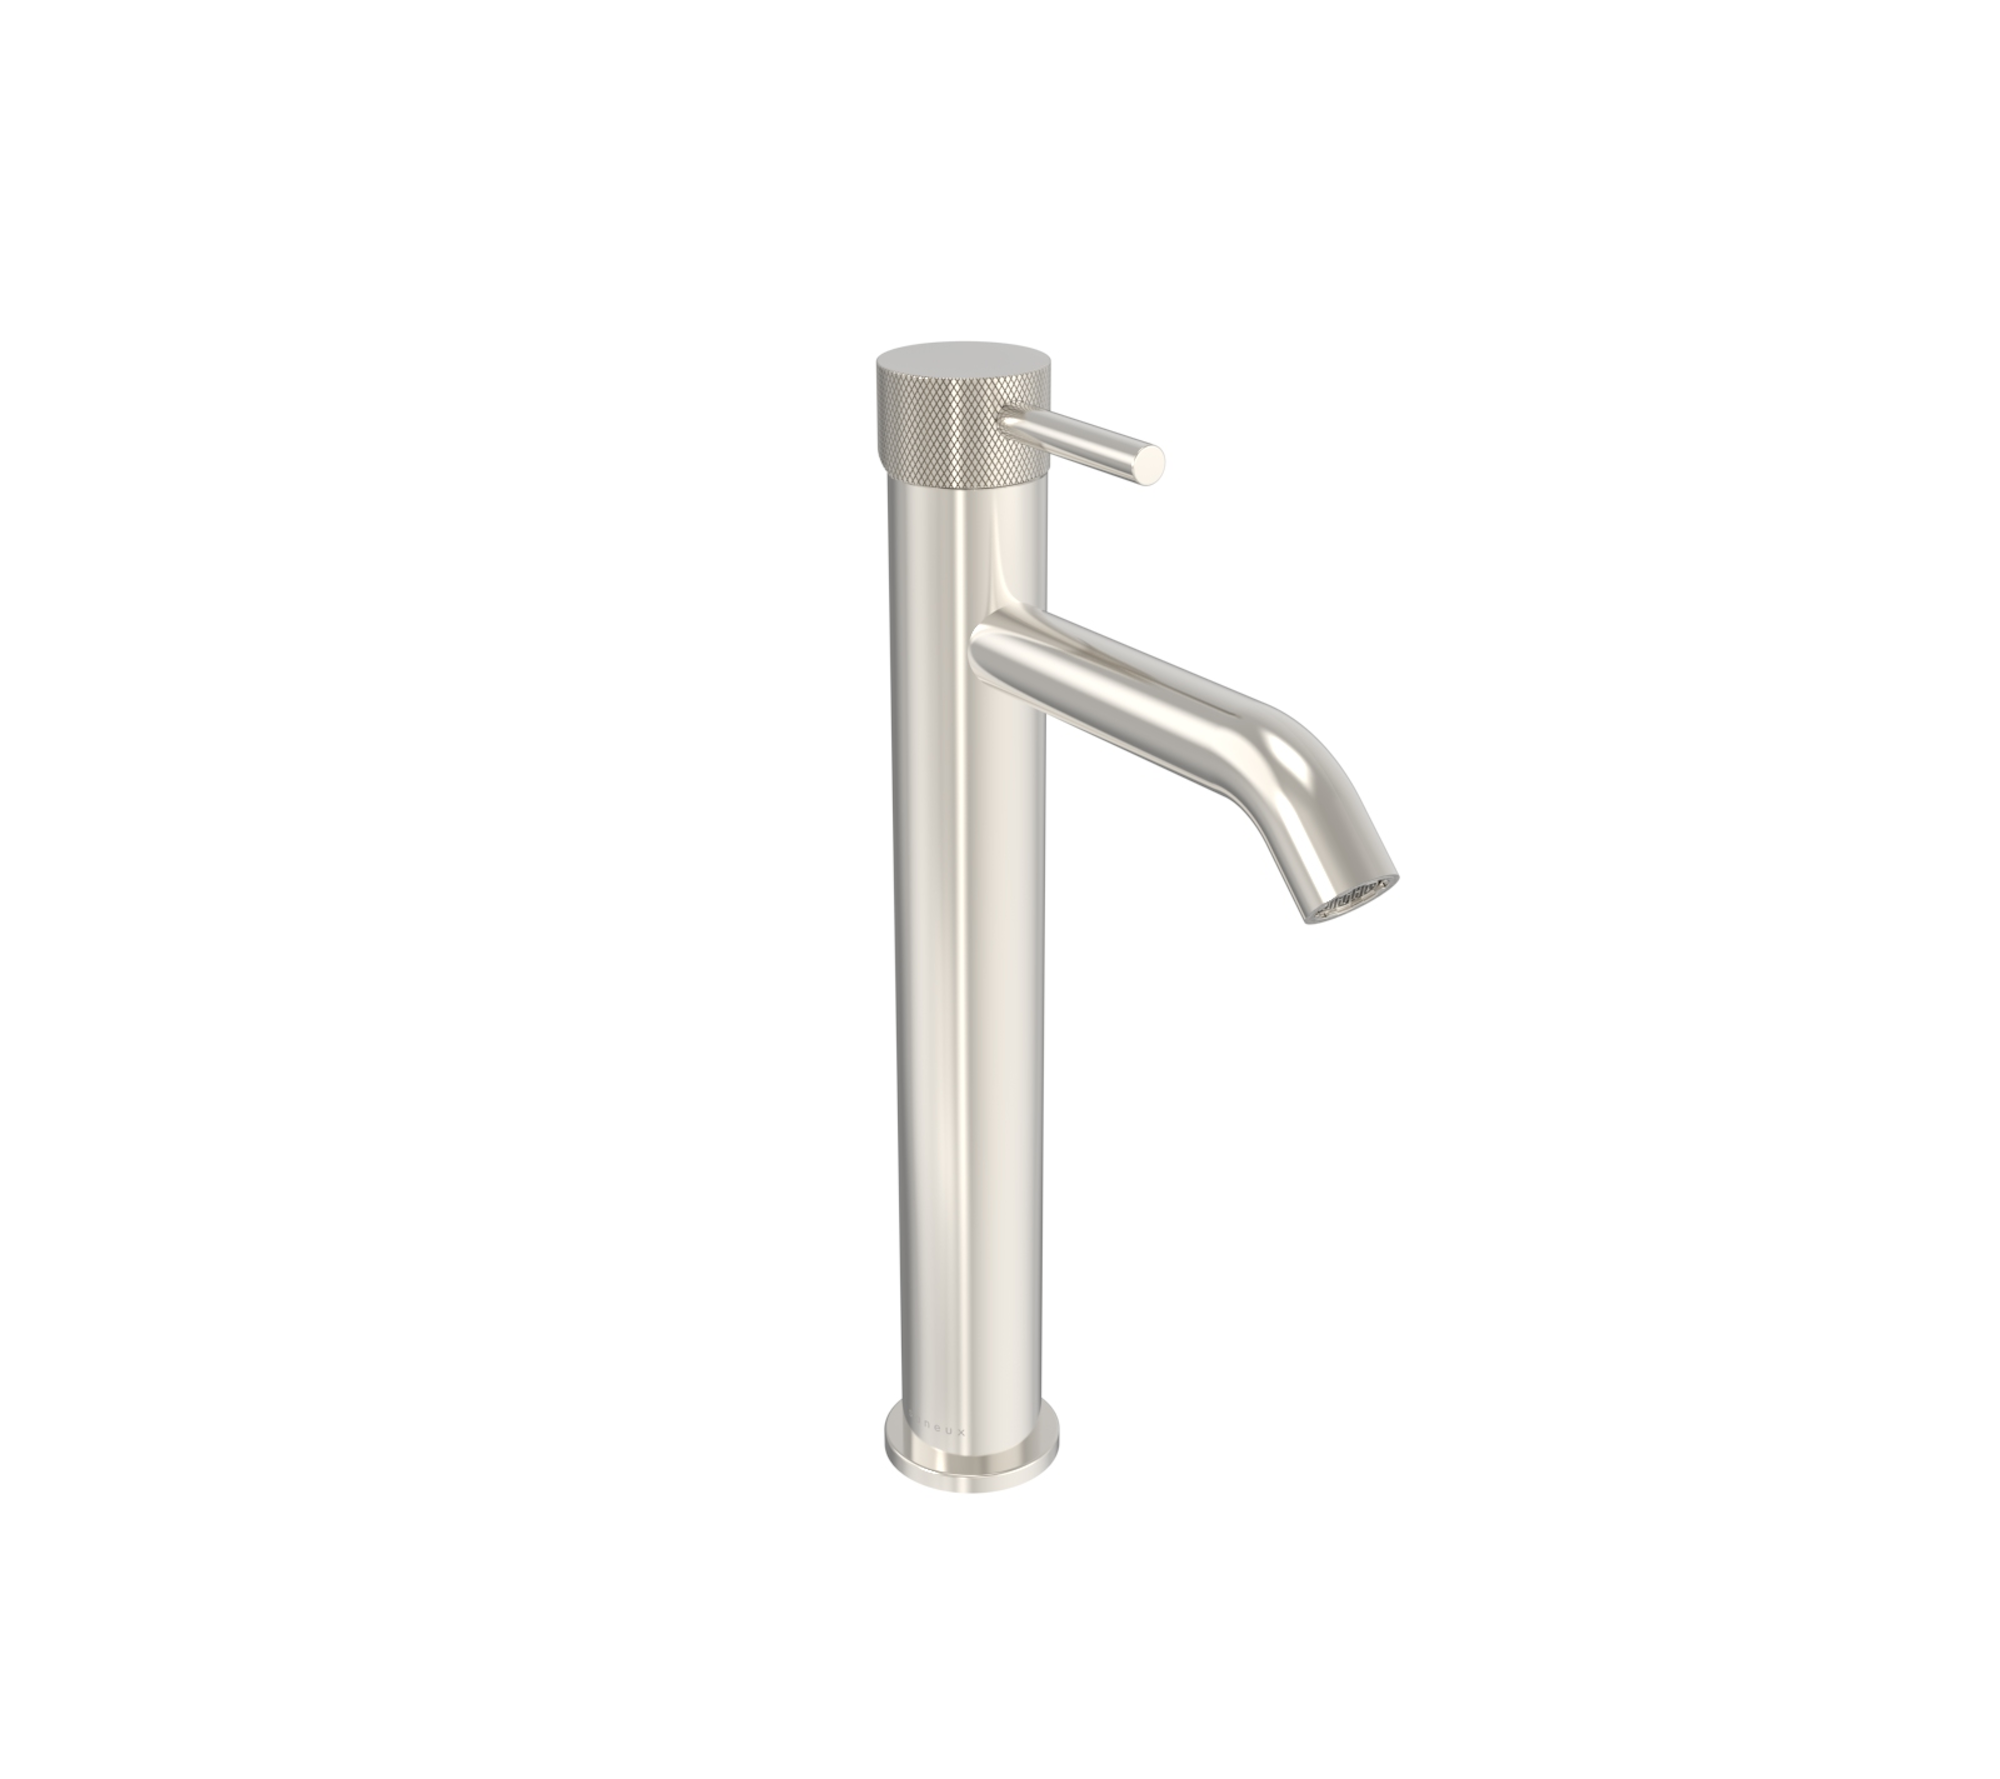 COS tall basin mixer with knurled handle - Brushed Nickel